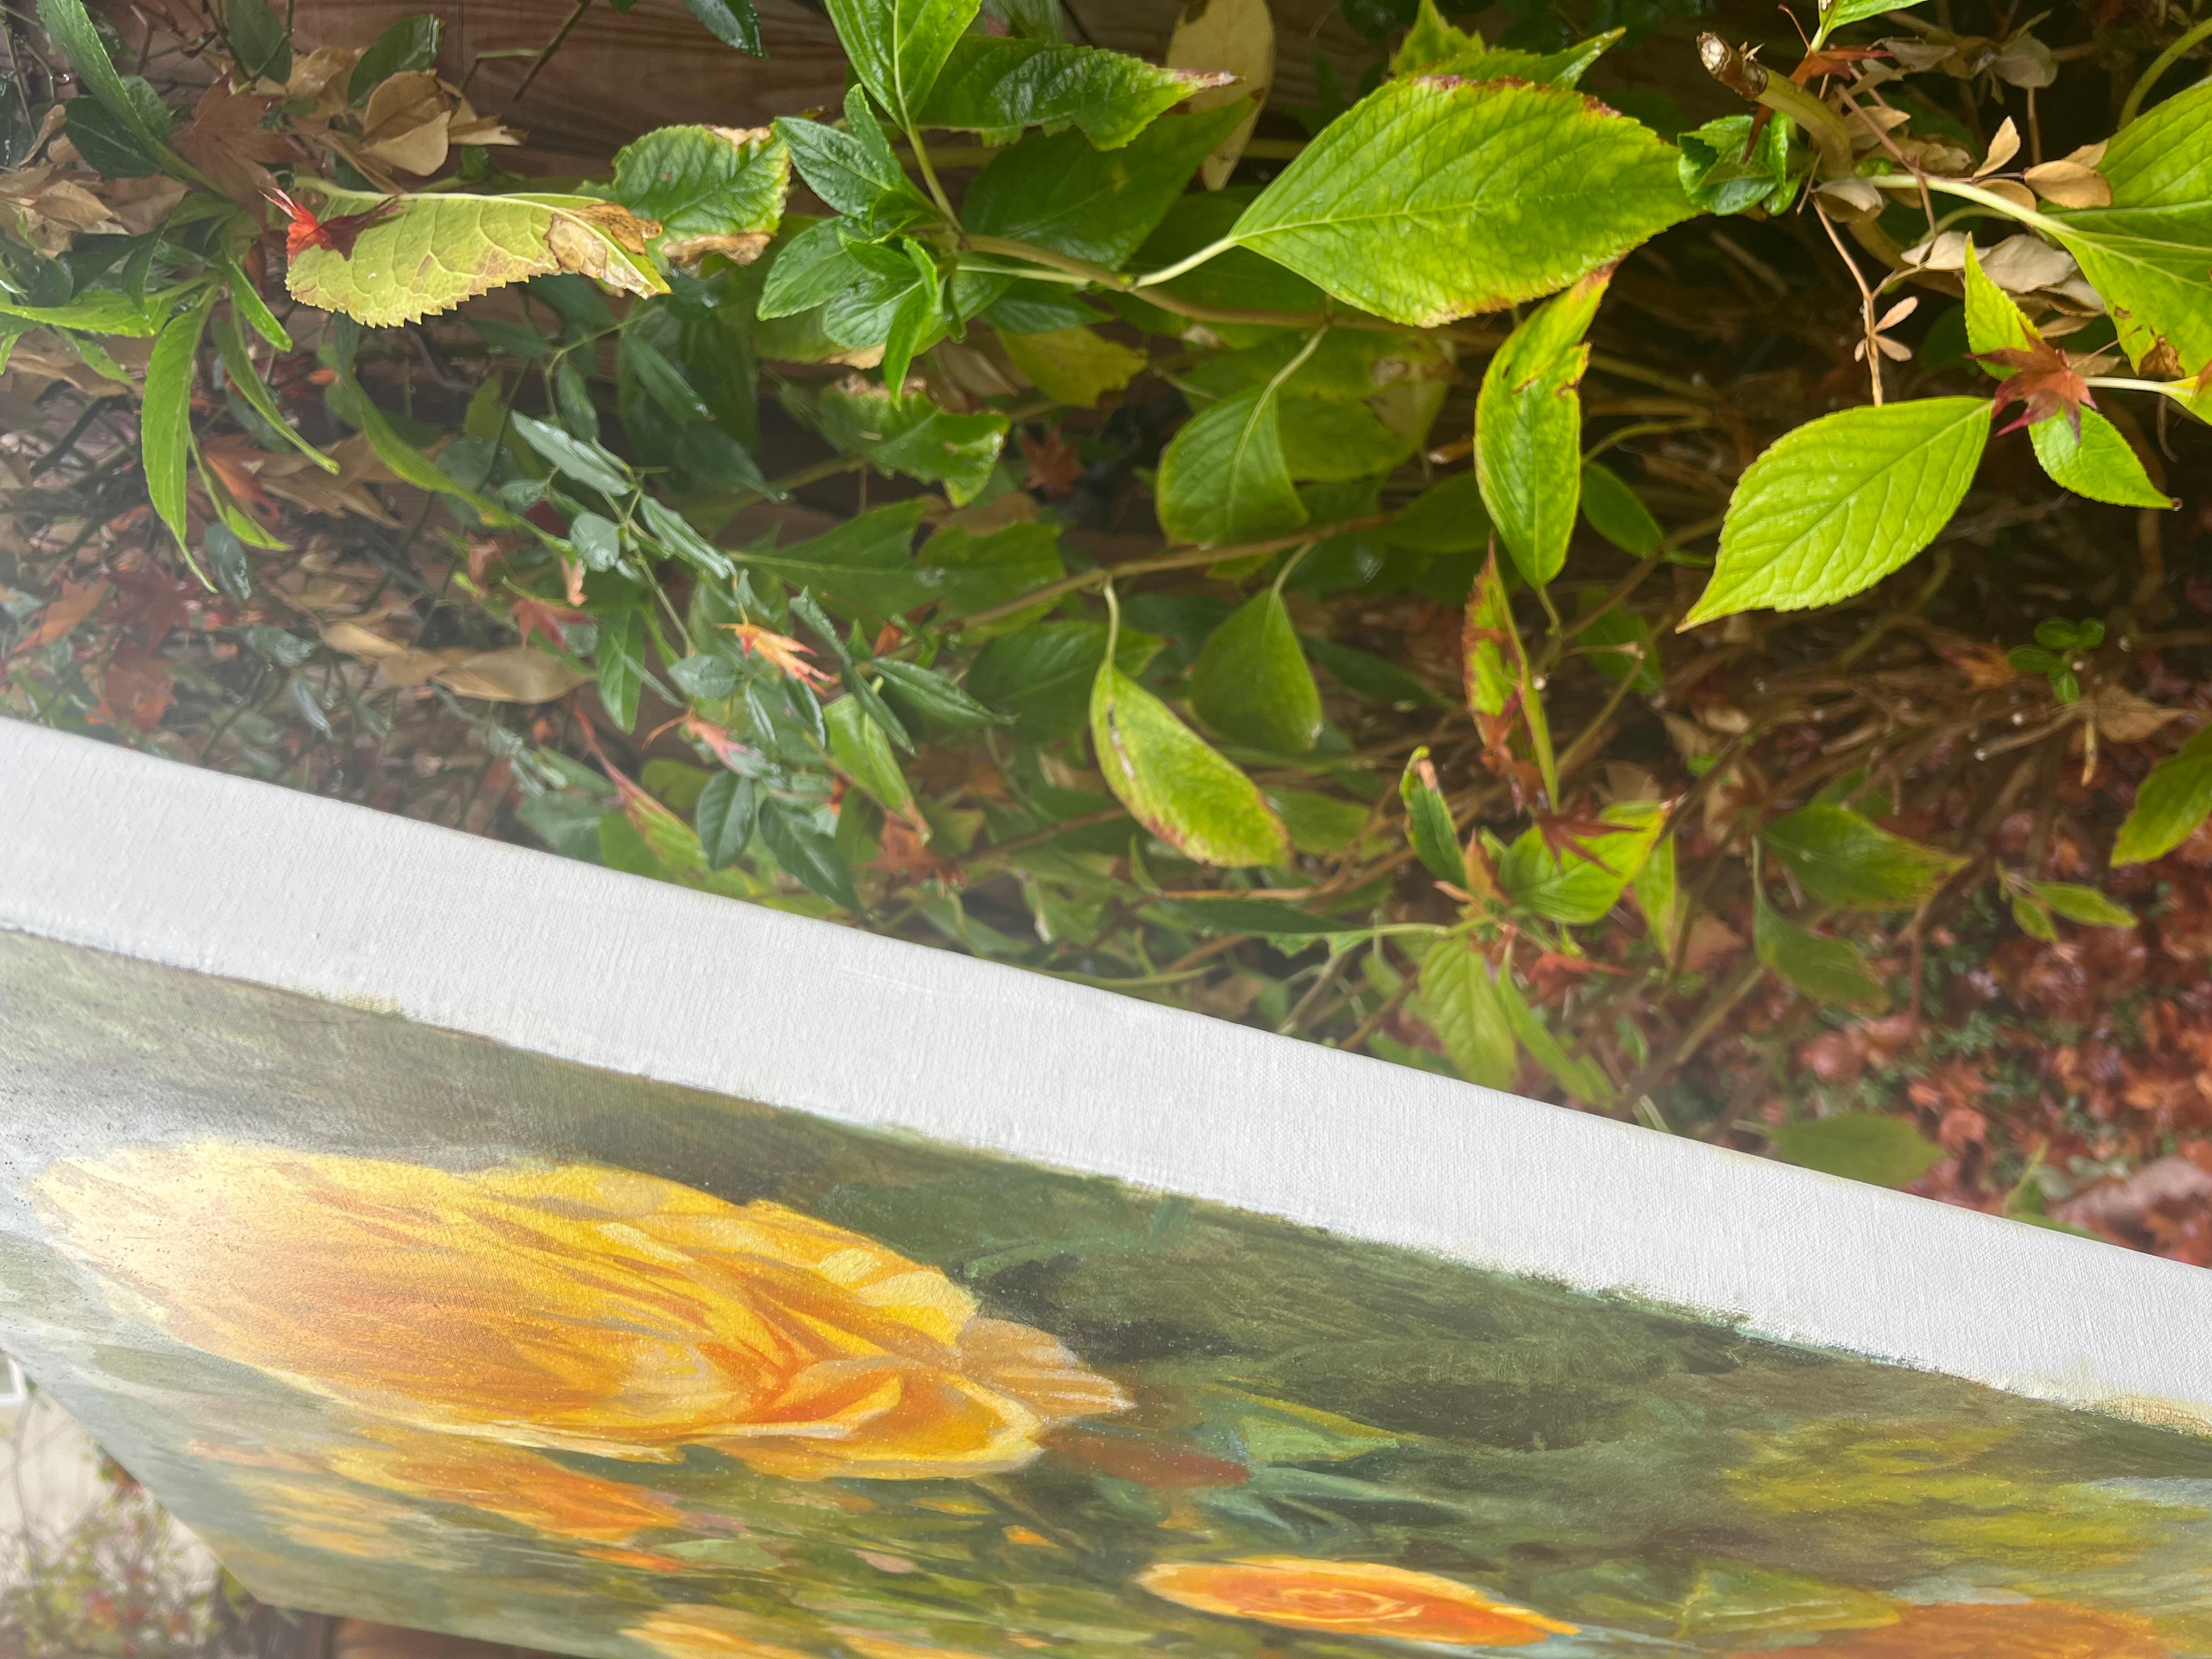 <p>Artist Comments<br>There is so much life and mysterious ephemeral beauty within gardens that continues to inspire artist Hilary Gomes. In her eyes, blooming flowers transcend their physical form and become a powerful metaphor for life. The golden